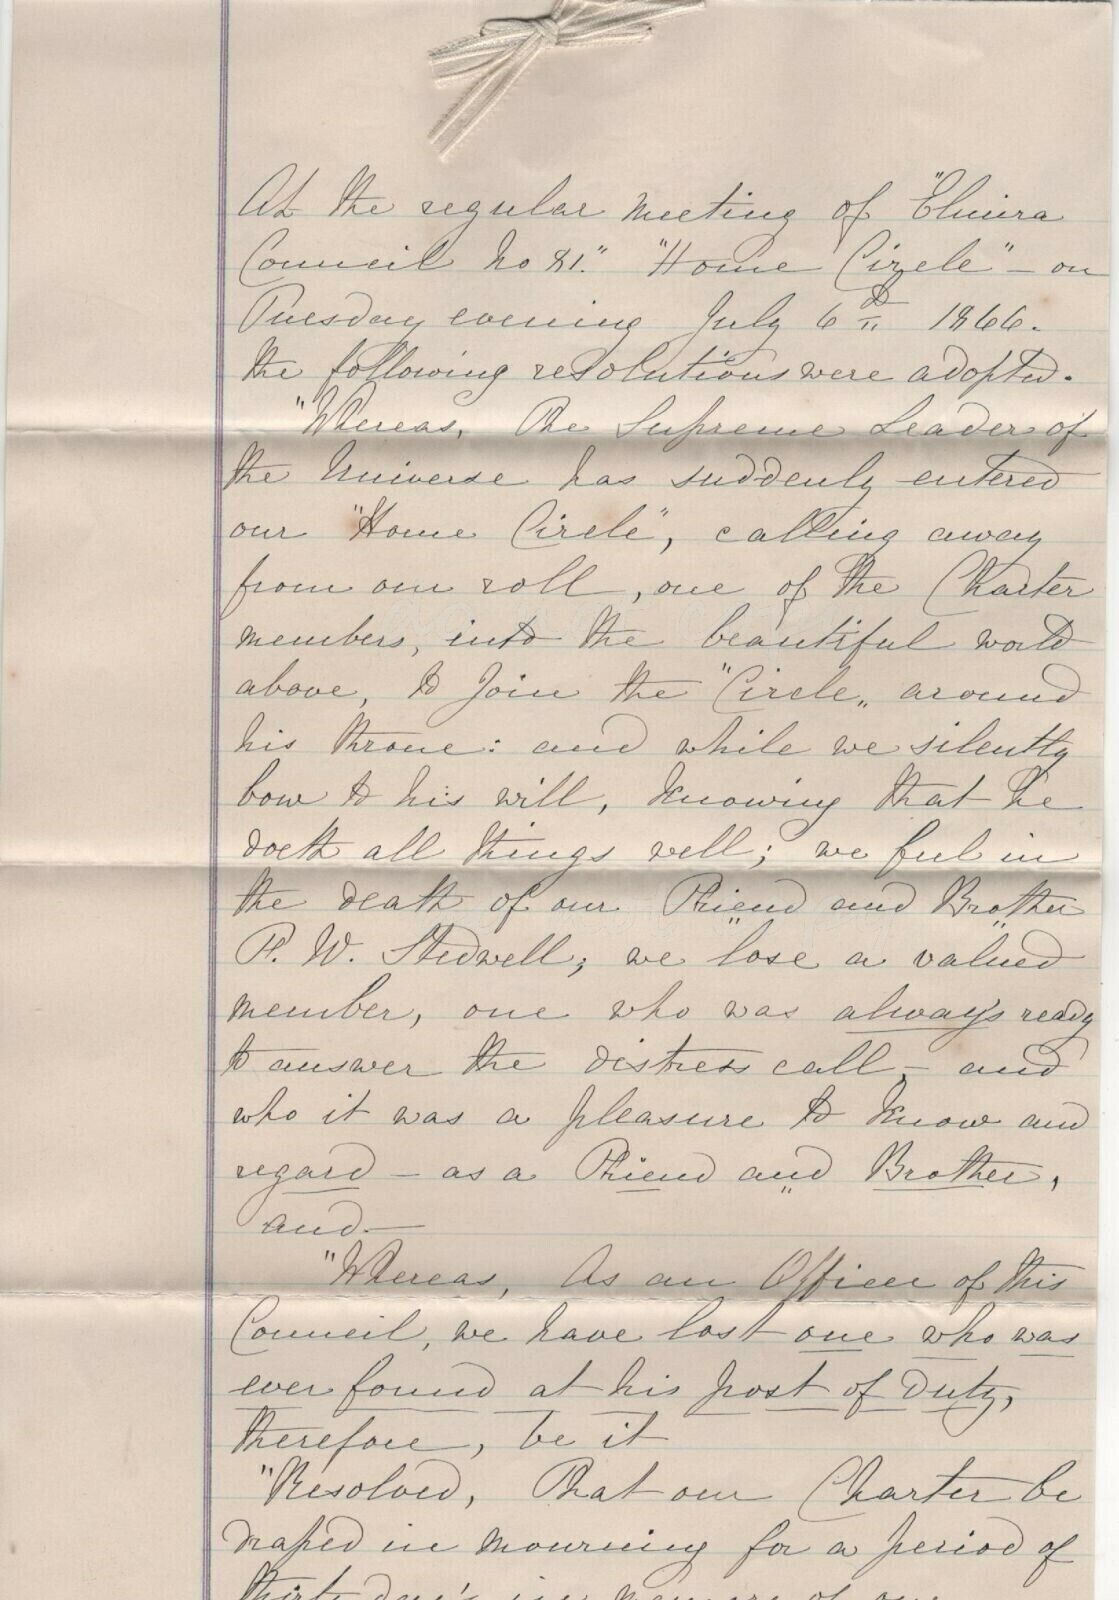 Elmira Ny Home Circle Council Antique Handwritten Letter Mourning Stedwell